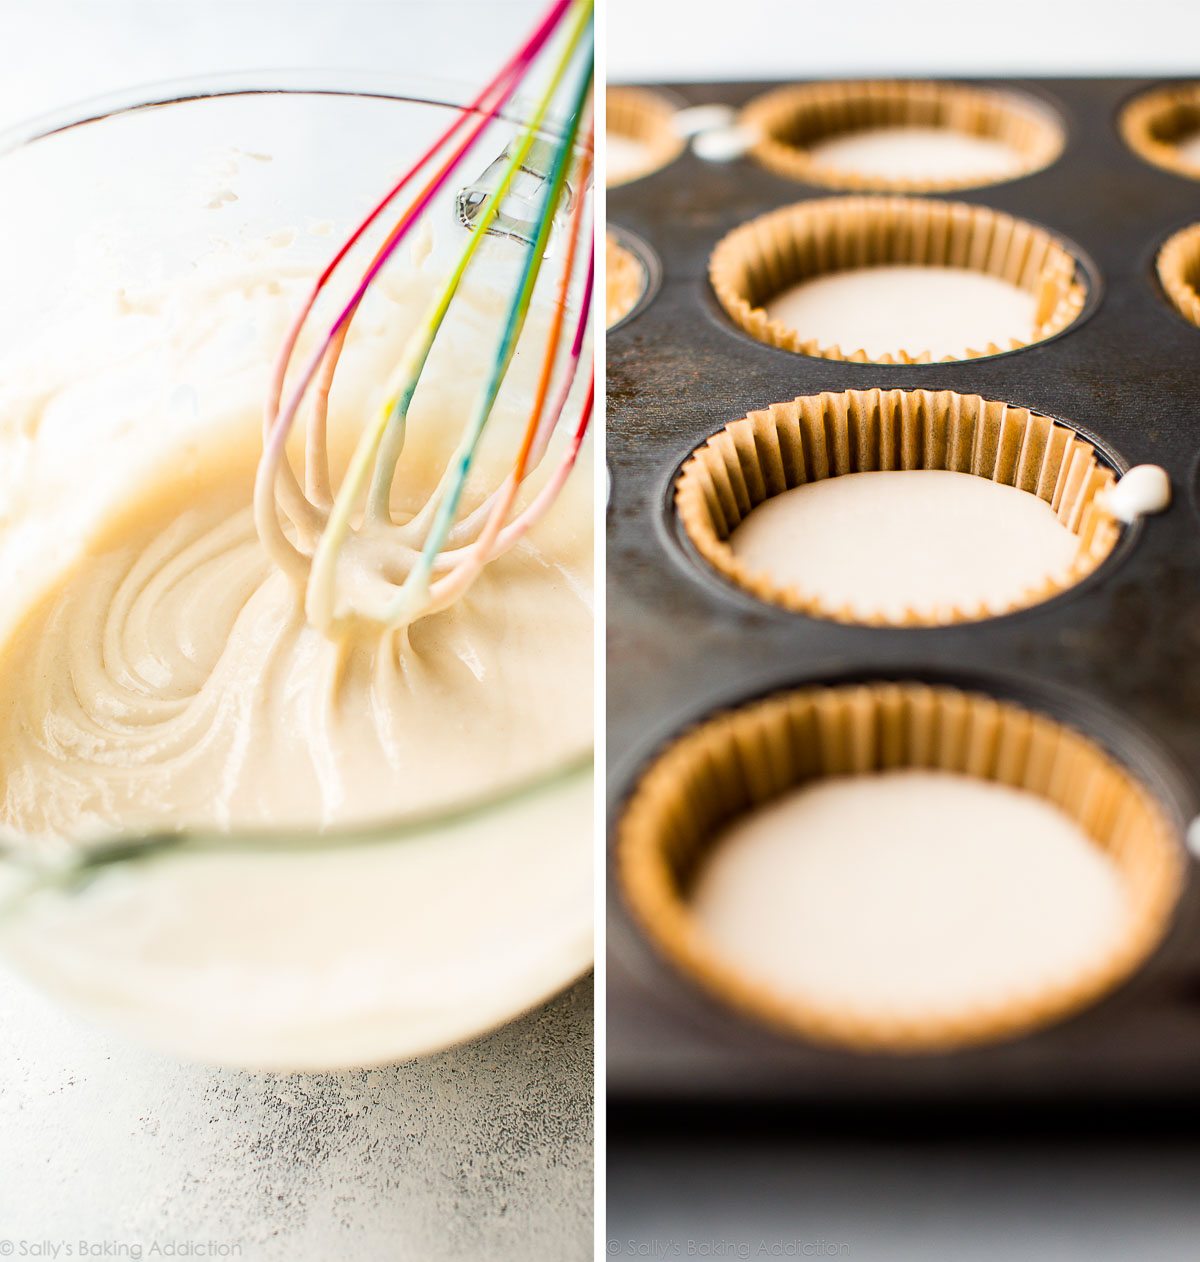 2 images of cupcake batter in a glass bowl with a colorful whisk and batter in a cupcake pan